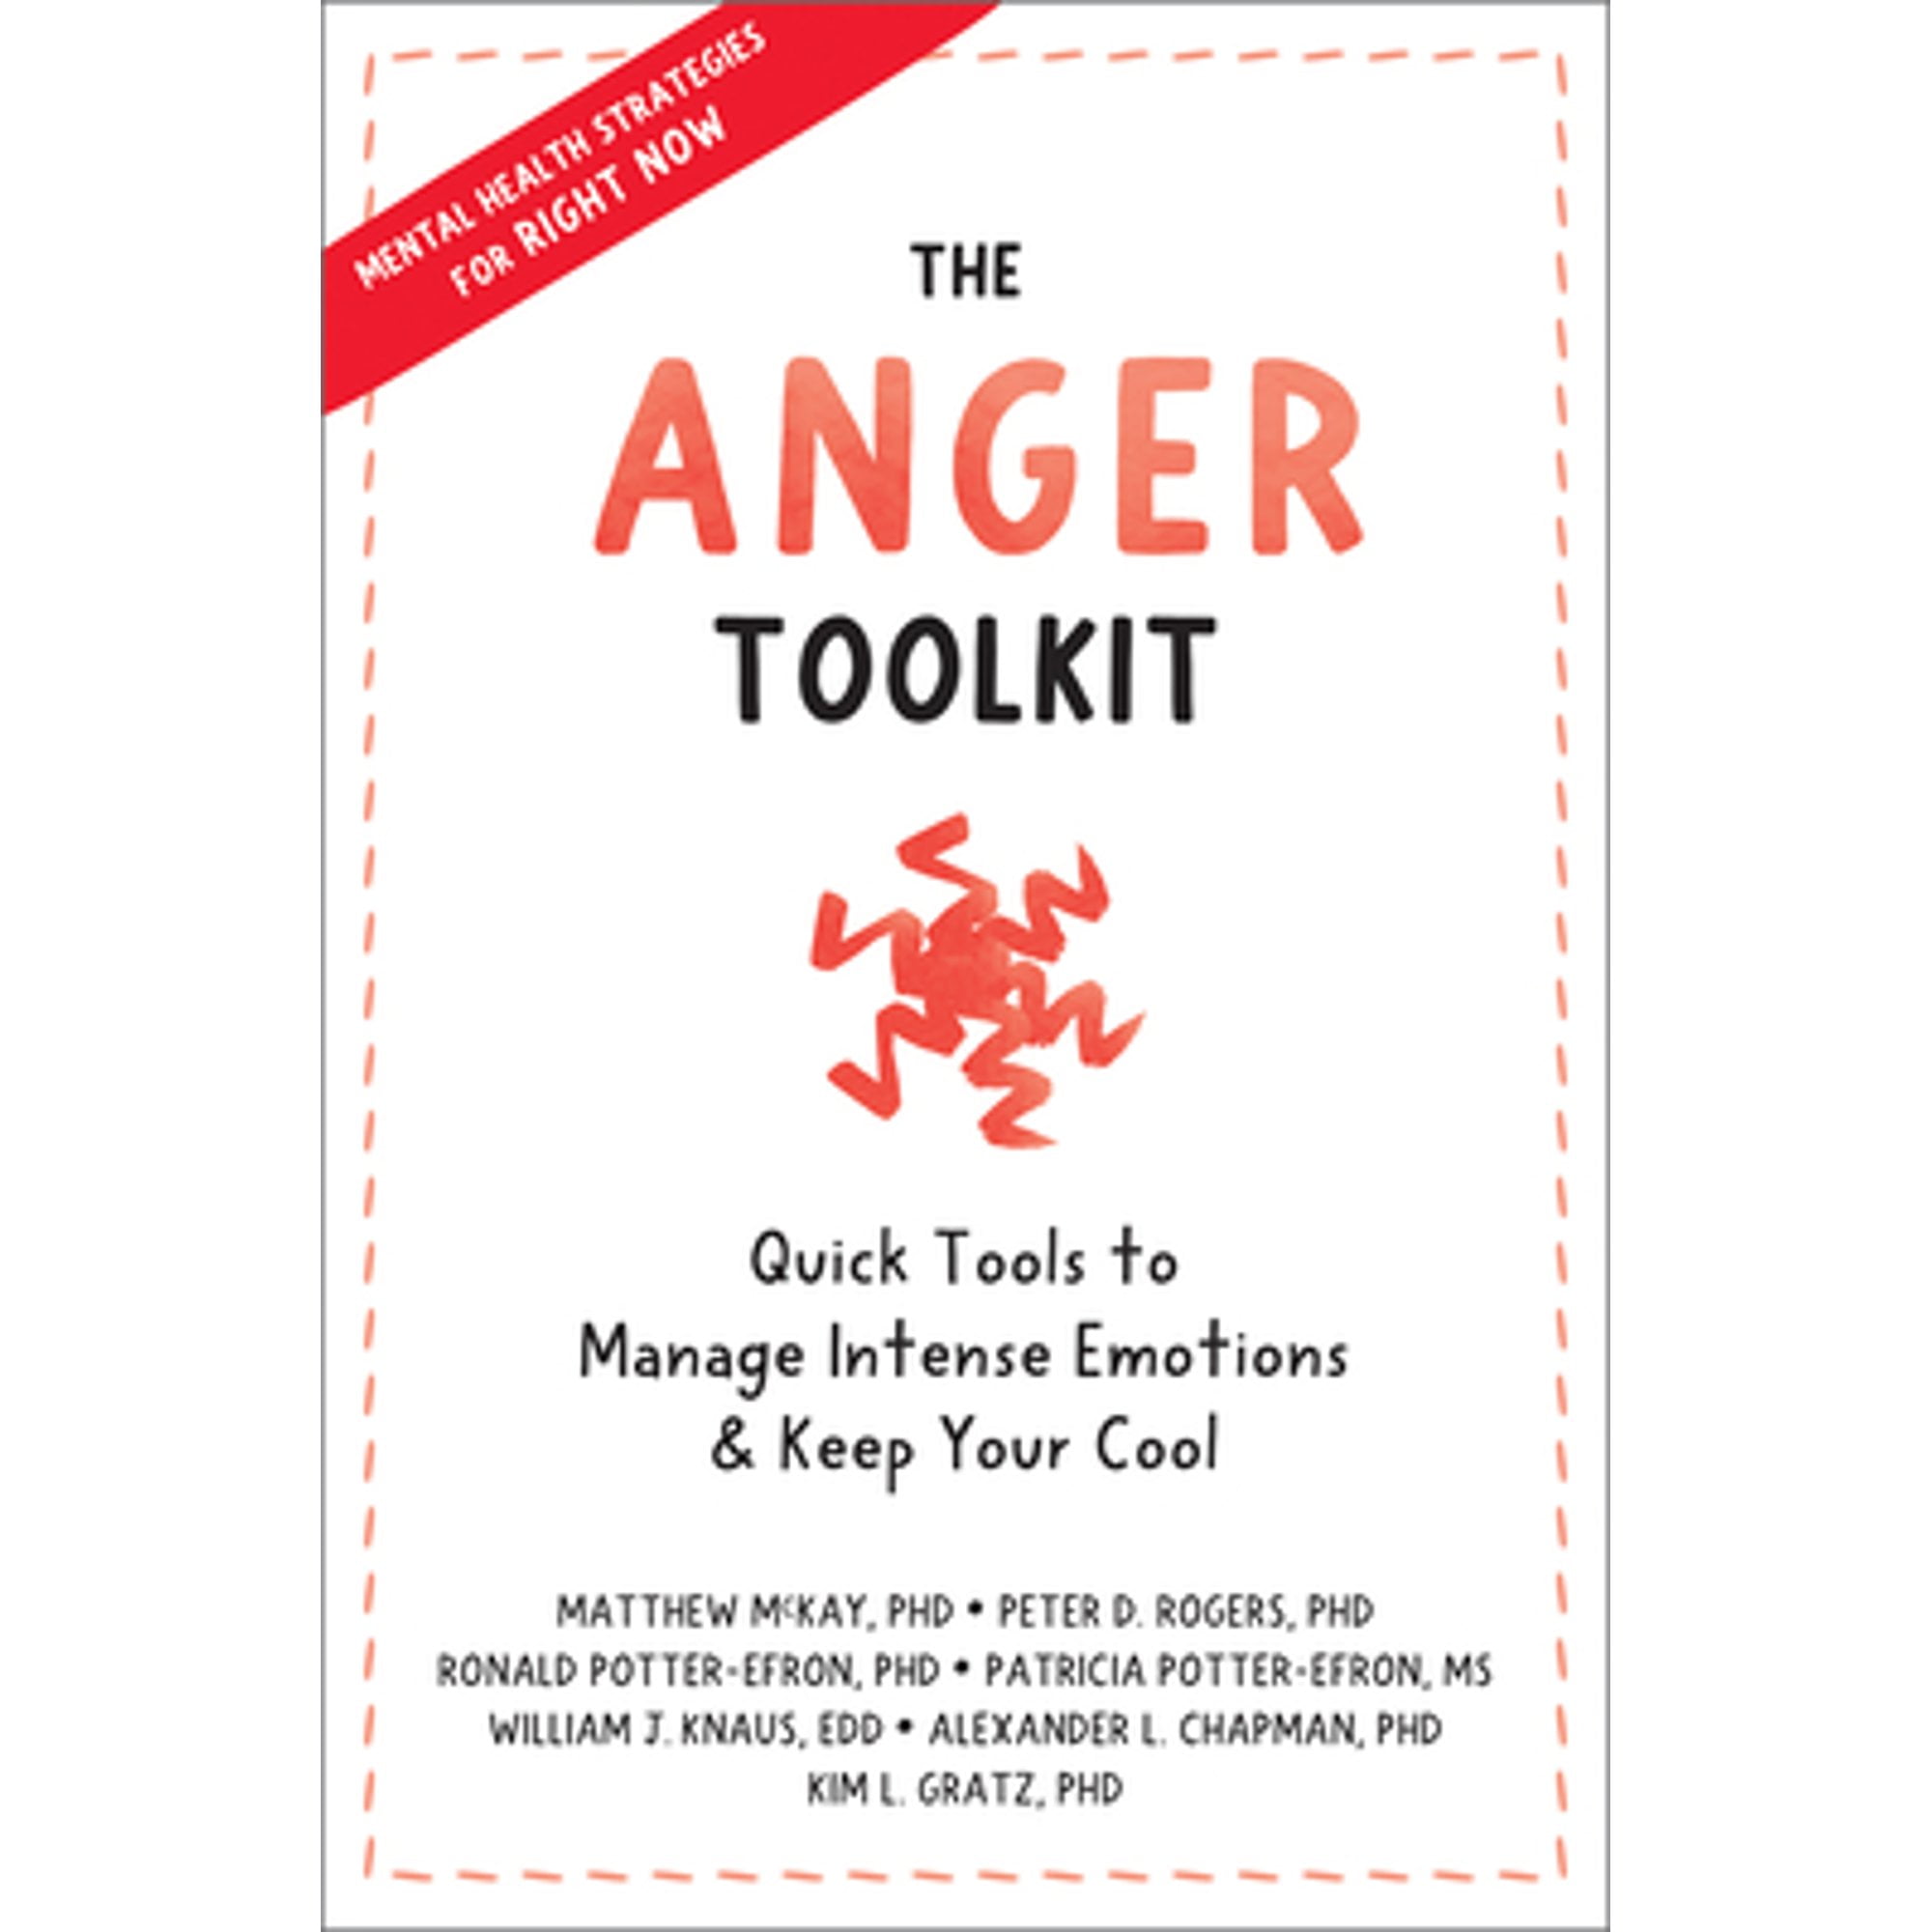 Pre-Owned The Anger Toolkit: Quick Tools to Manage Intense Emotions and Keep Your Cool (Paperback) by Peter D. Rogers, Ronald T. Potter-Efron, Patricia Potter-Efron